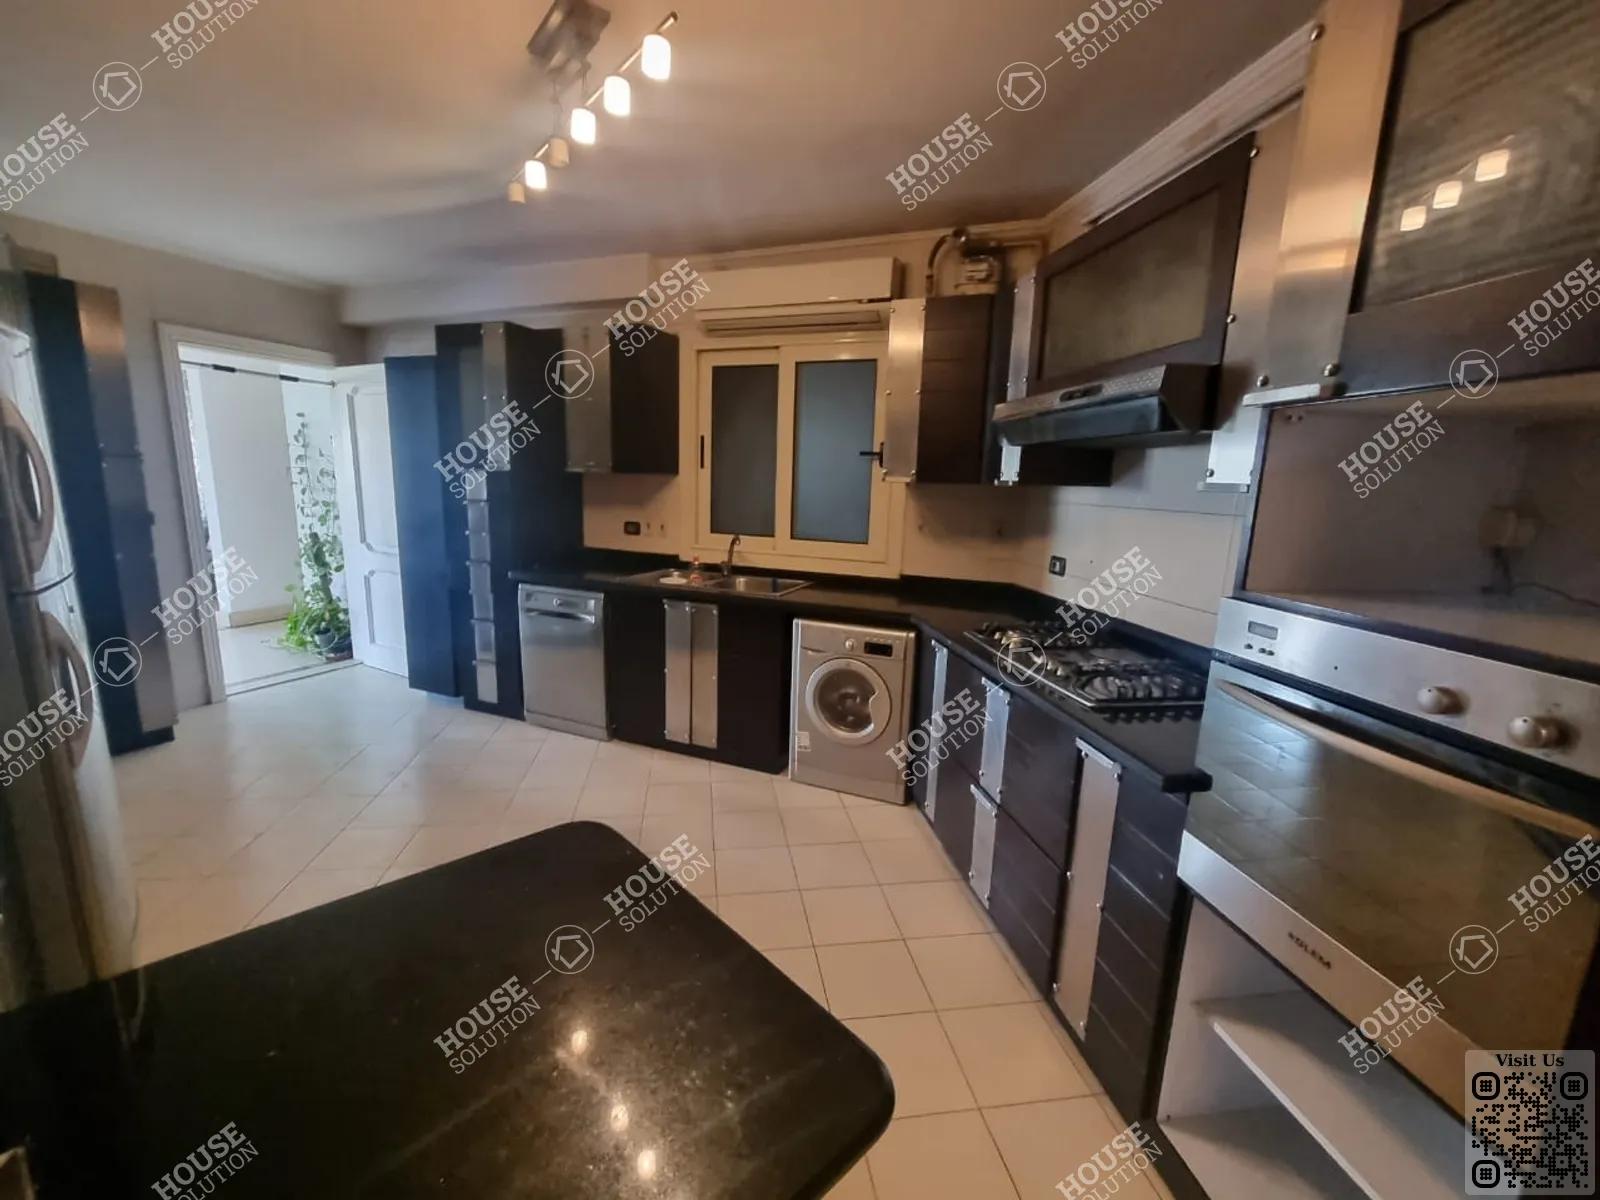 KITCHEN  @ Apartments For Rent In Maadi Maadi Sarayat Area: 180 m² consists of 3 Bedrooms 3 Bathrooms Modern furnished 5 stars #5643-2